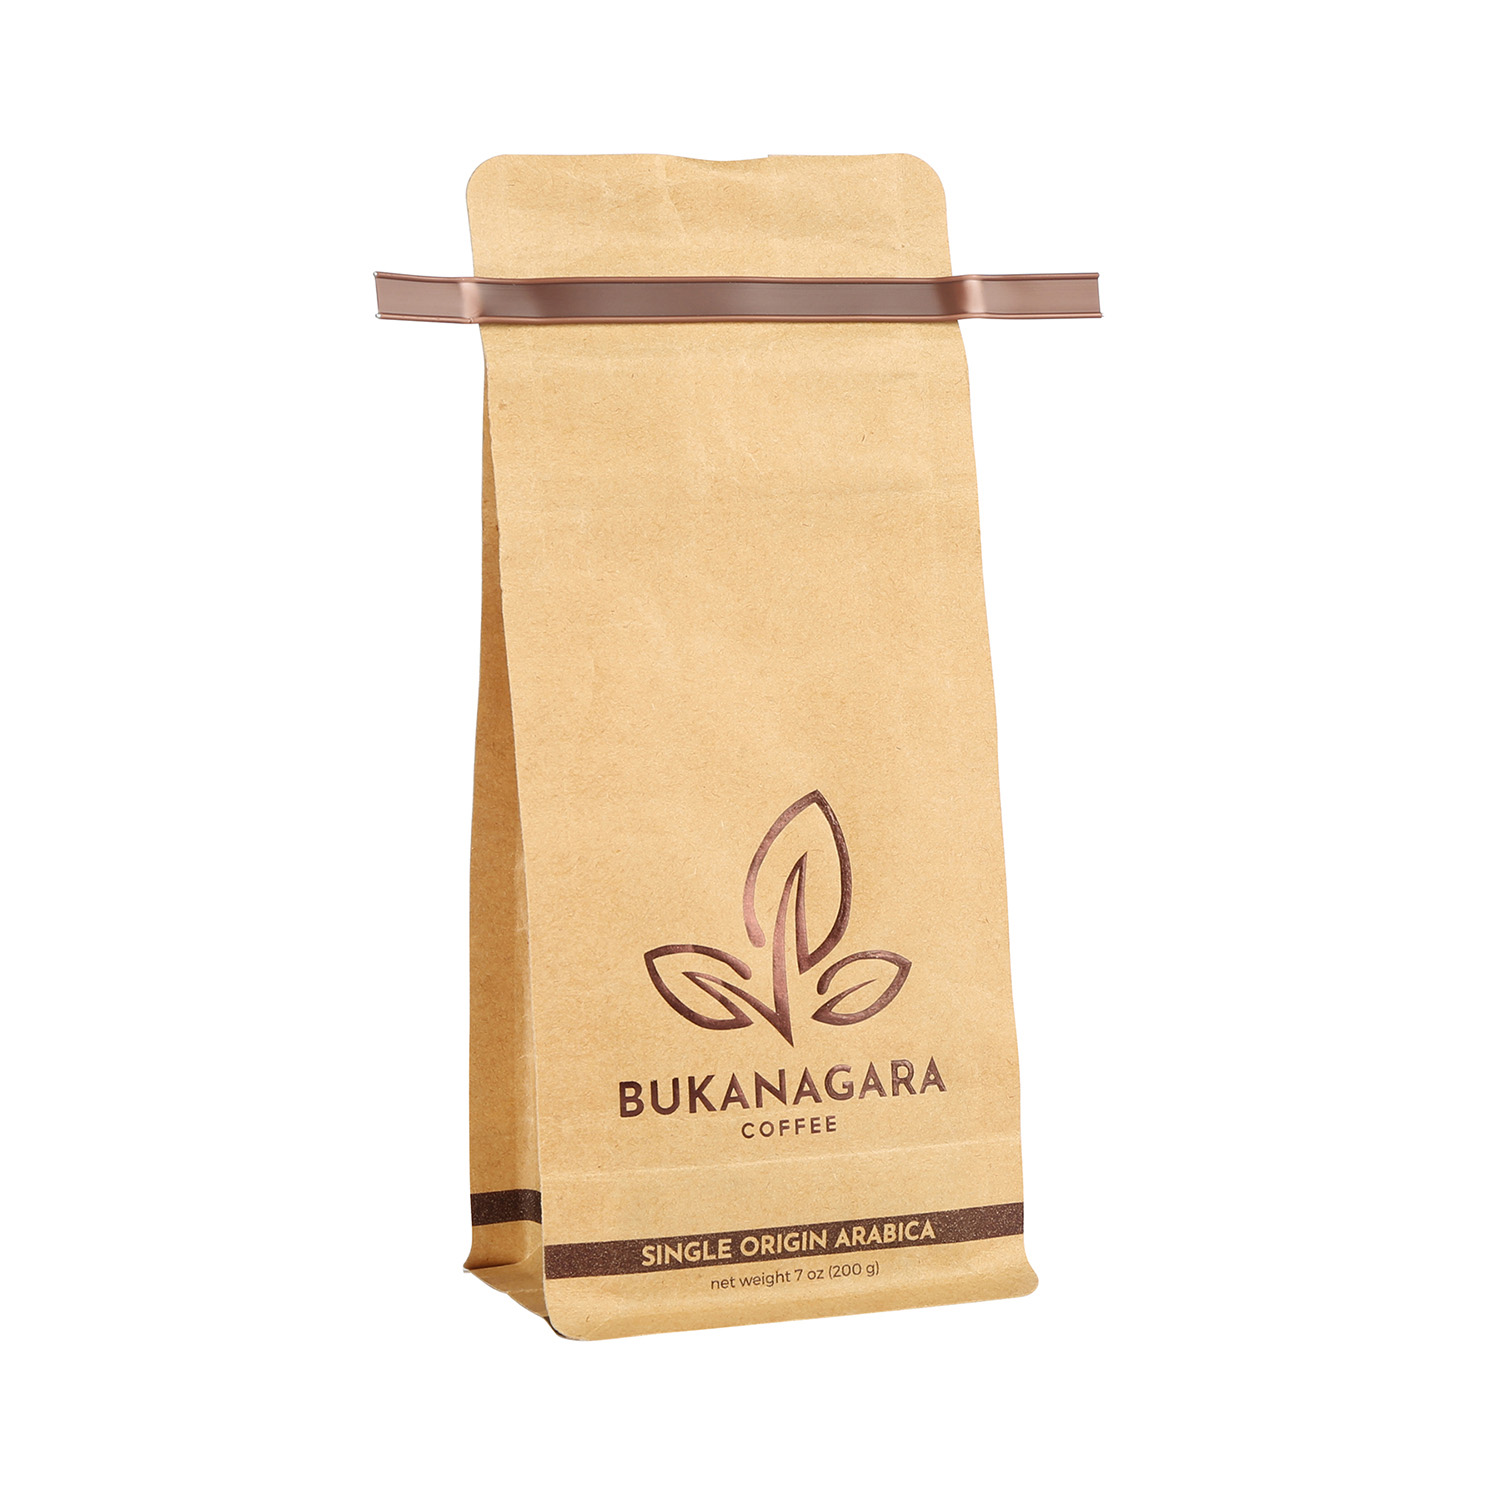 China Suppliers Home Compostable 2 Oz Kraft Paper Bags for Coffee